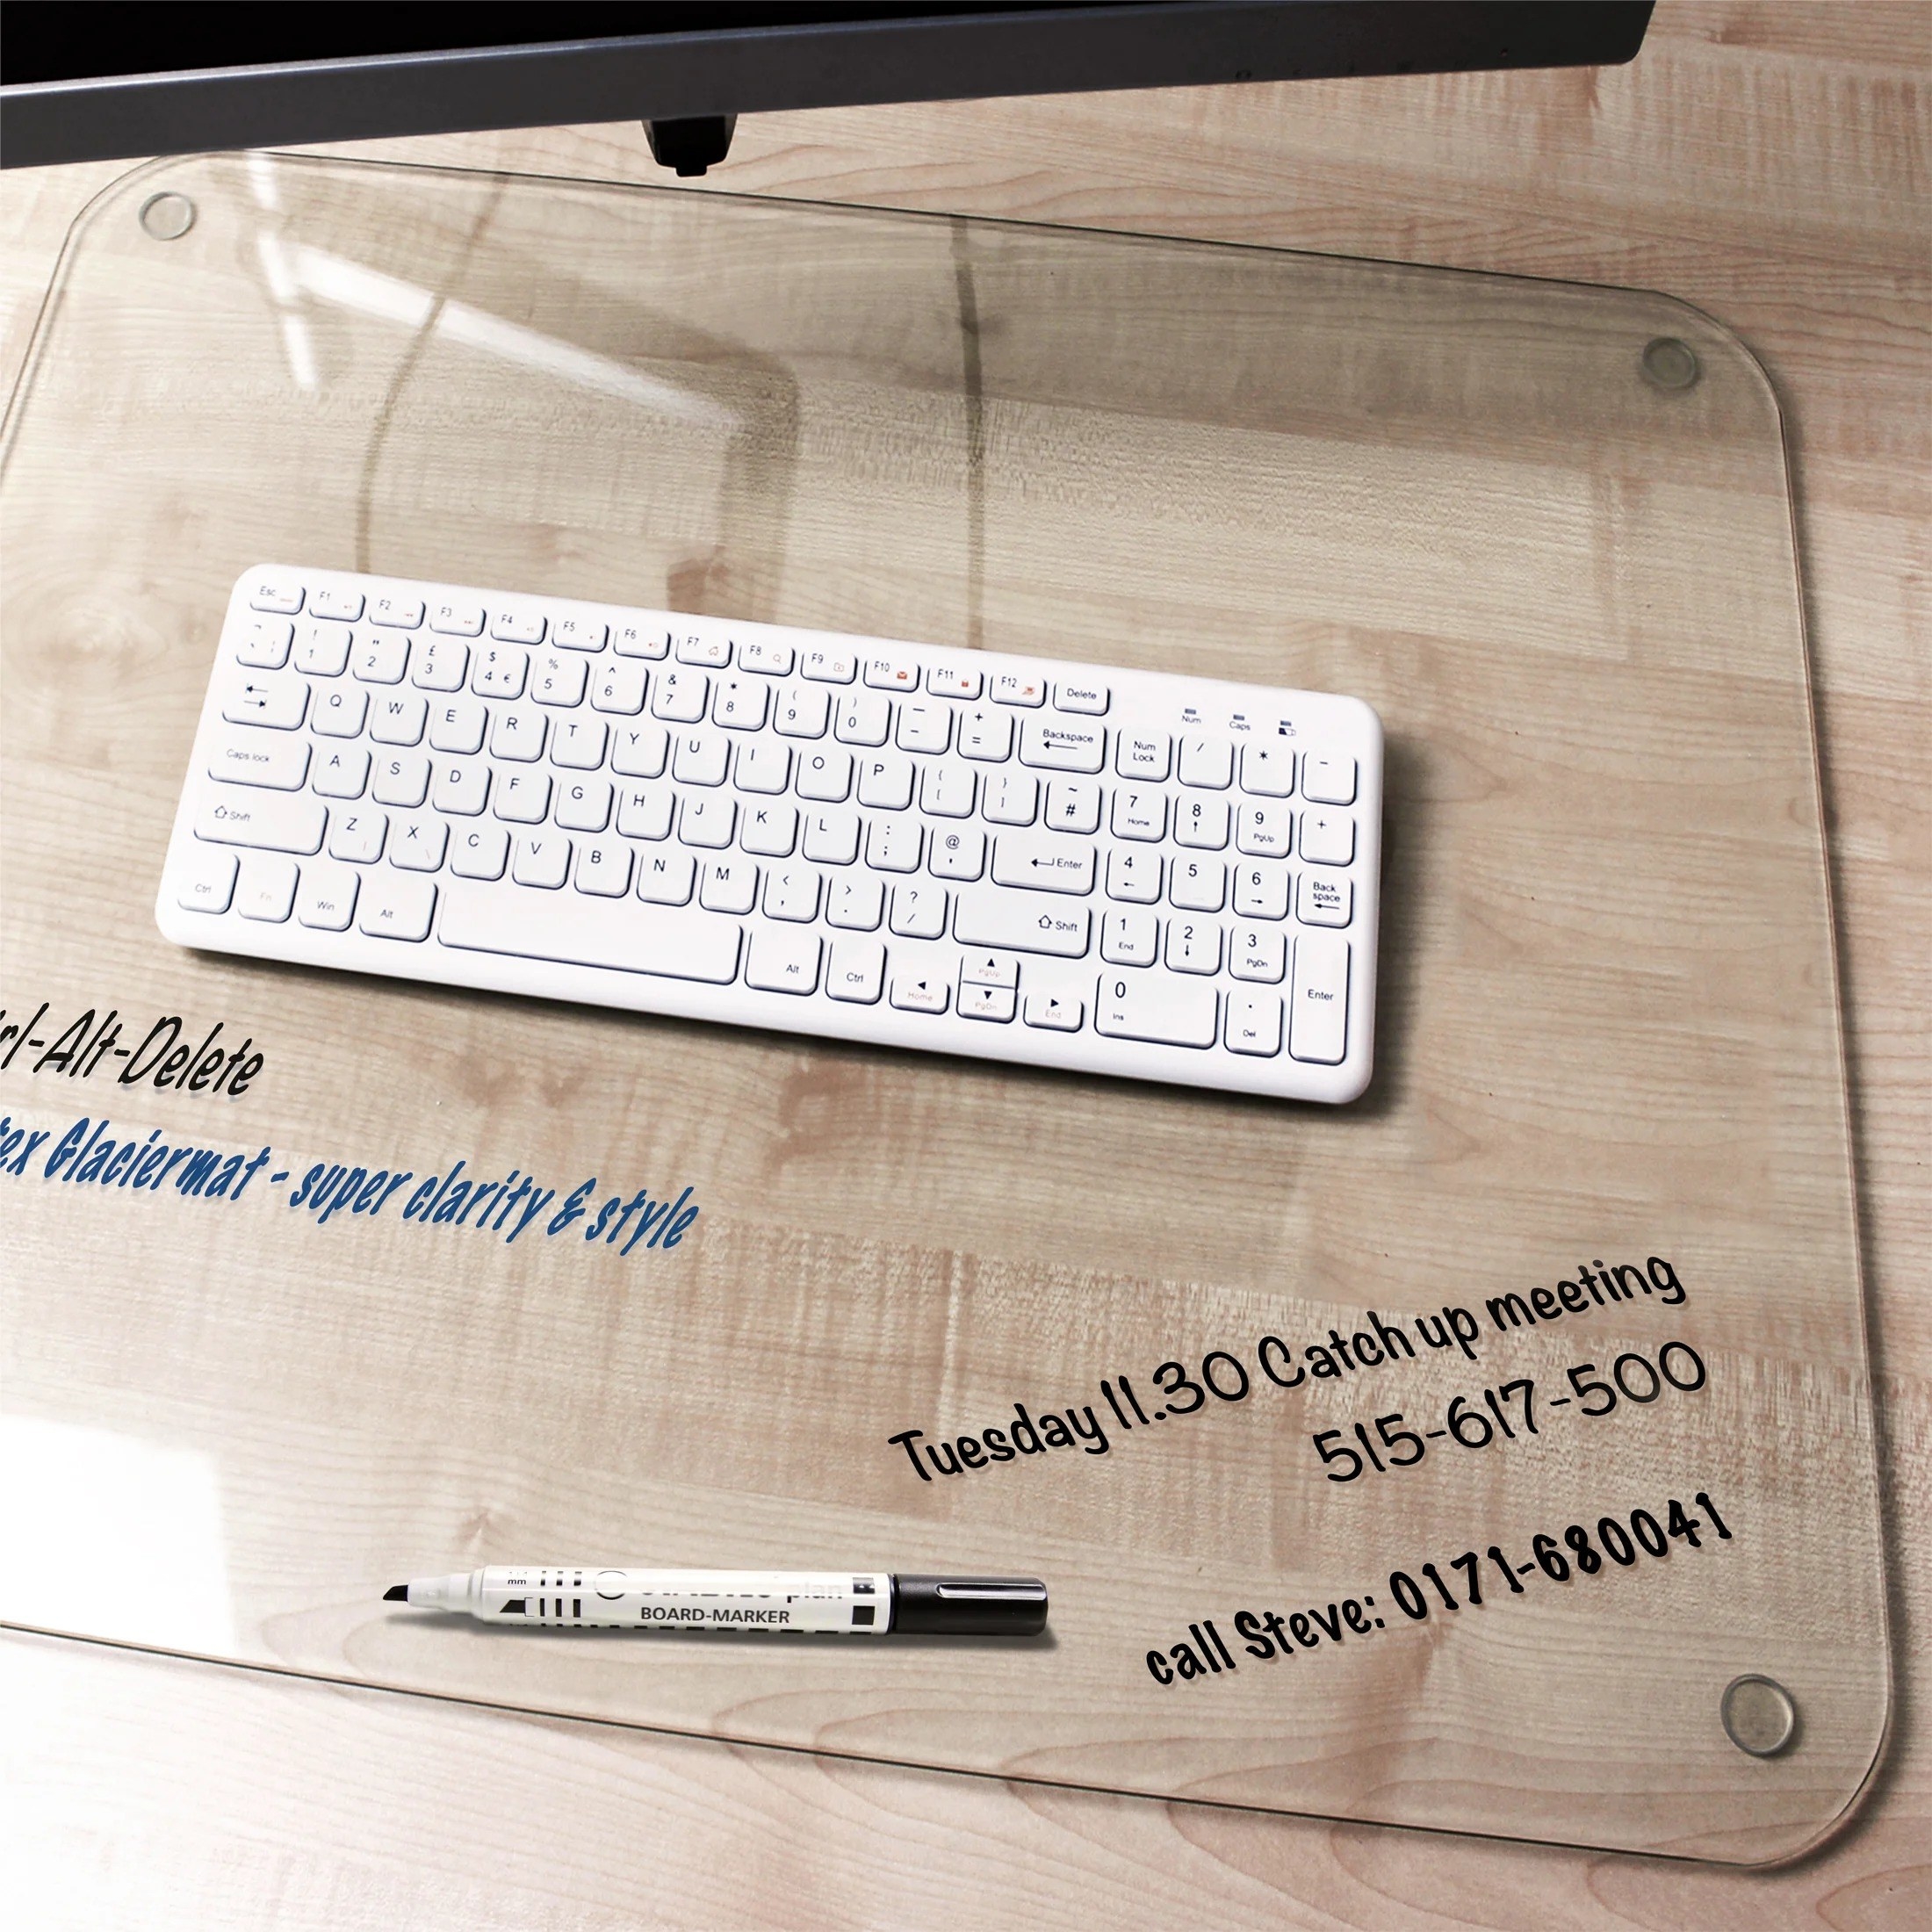 the glass desk pad with notes written on it by a white erase marker